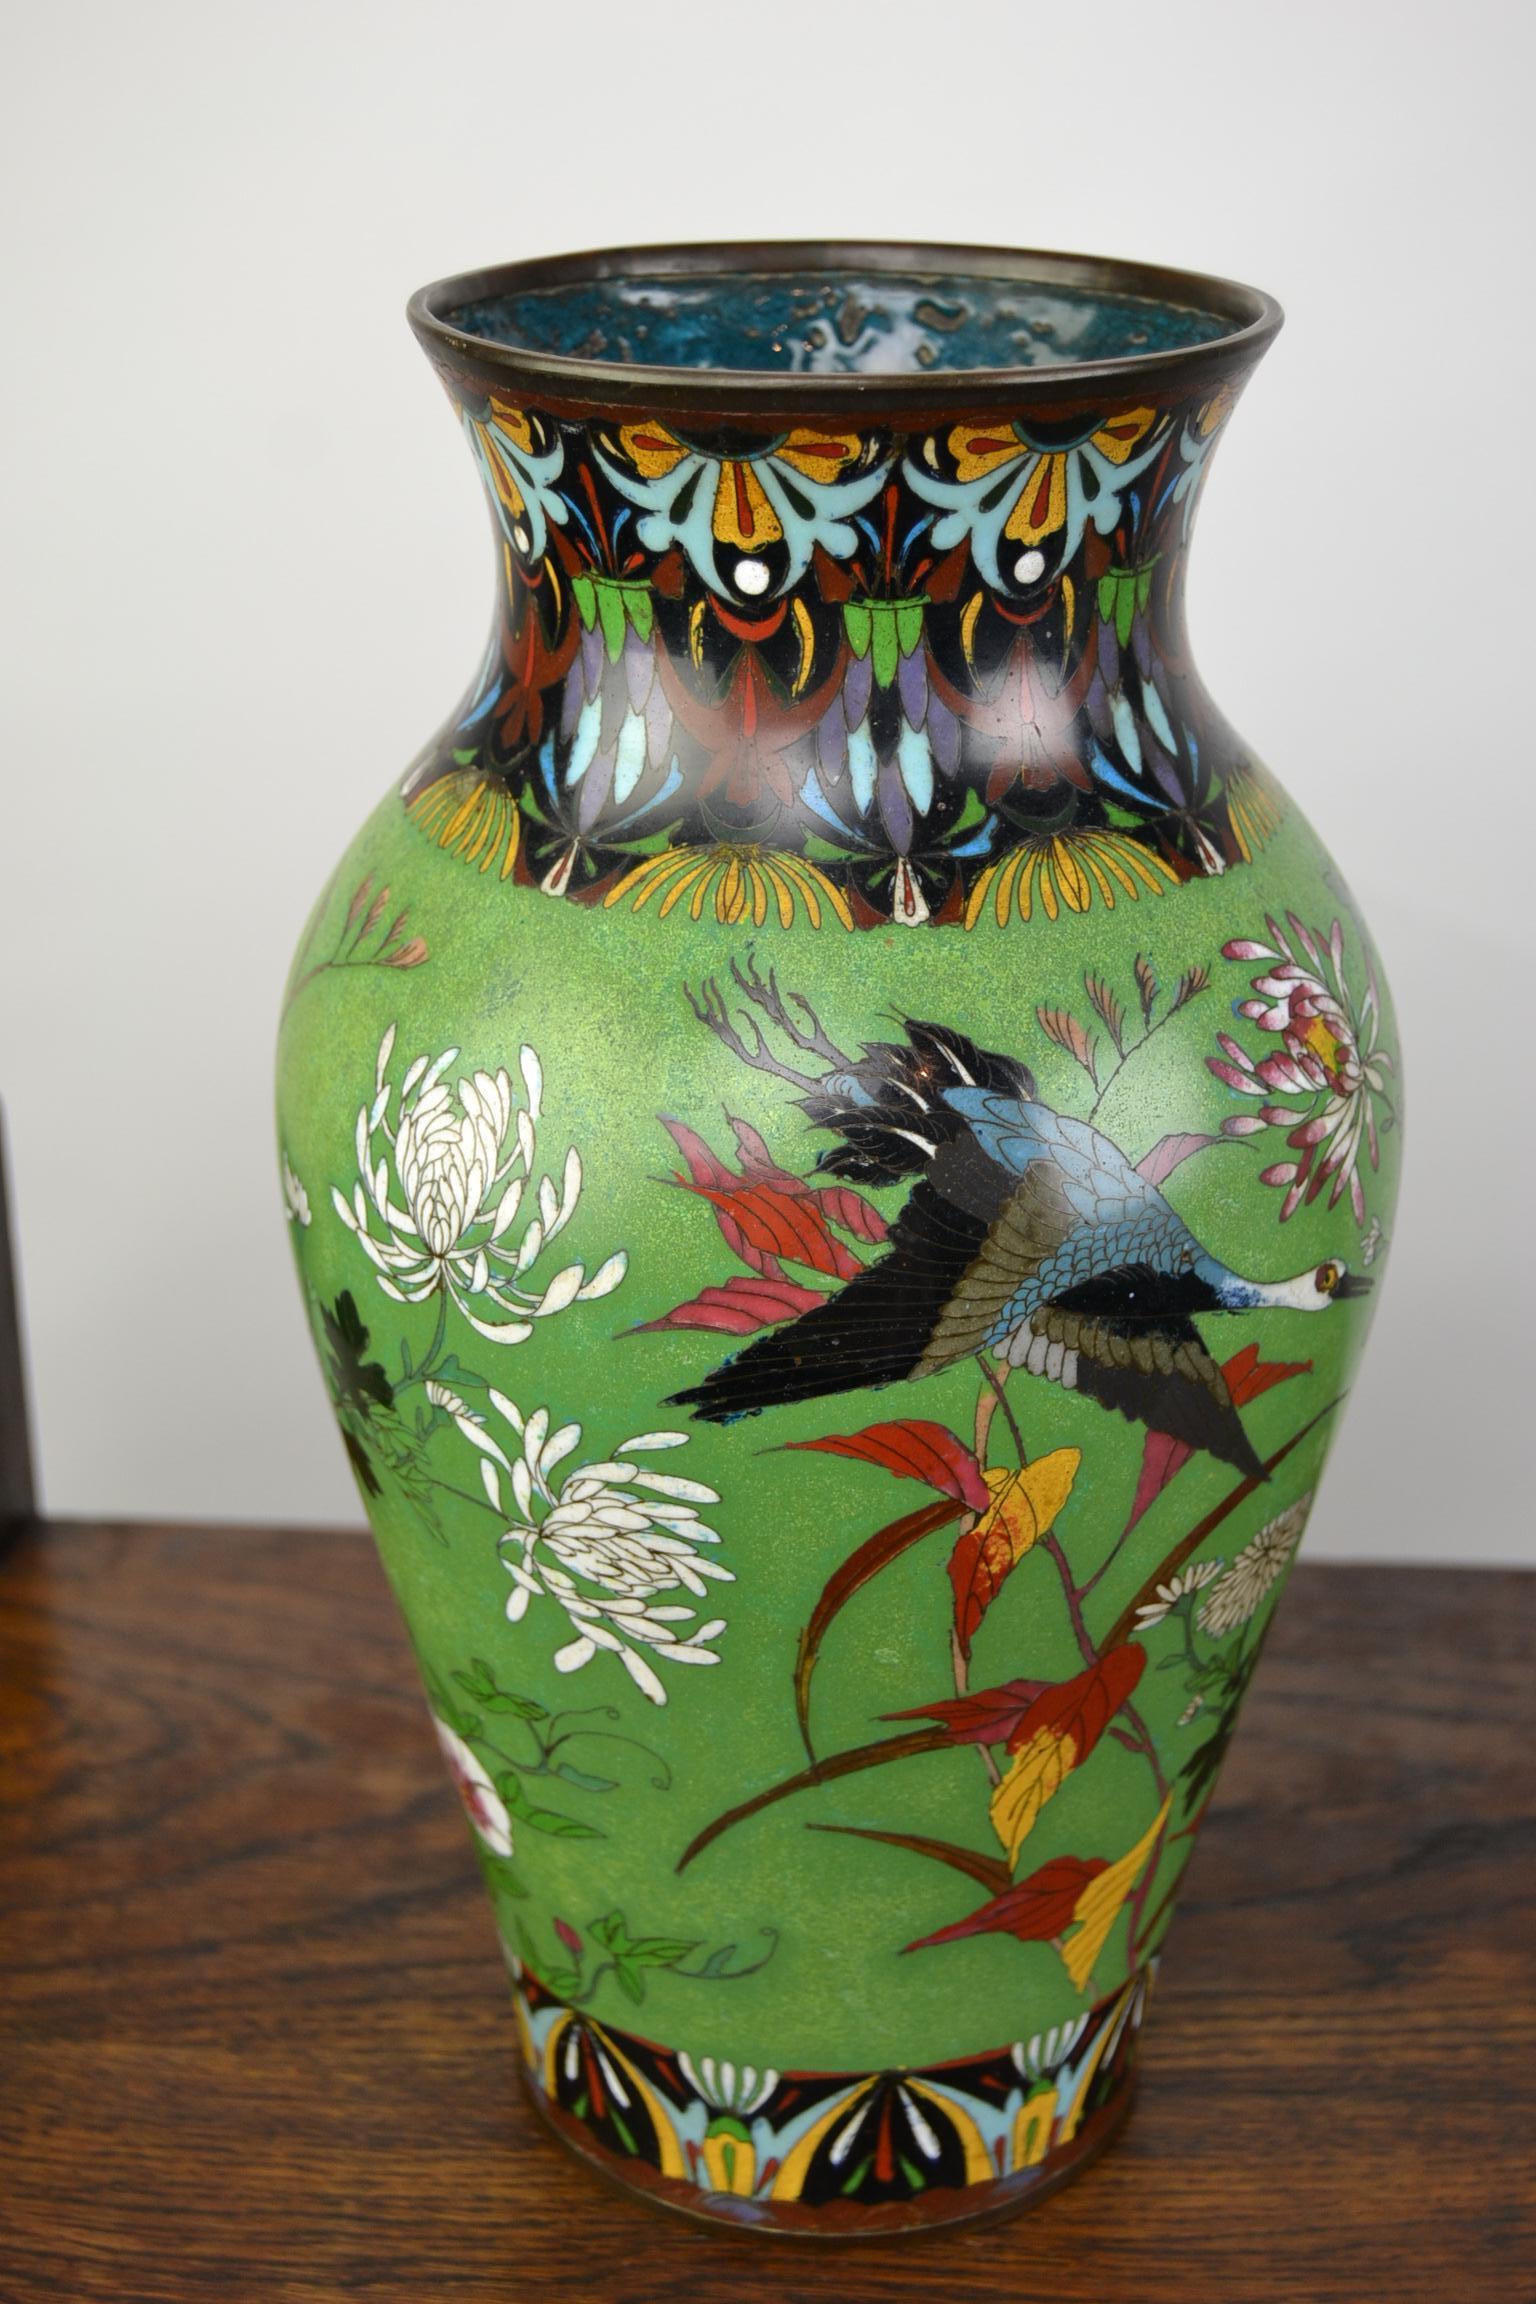 Pair of Japanese Cloisonne Enamel on Copper Vases with Crane Birds and Flowers  11